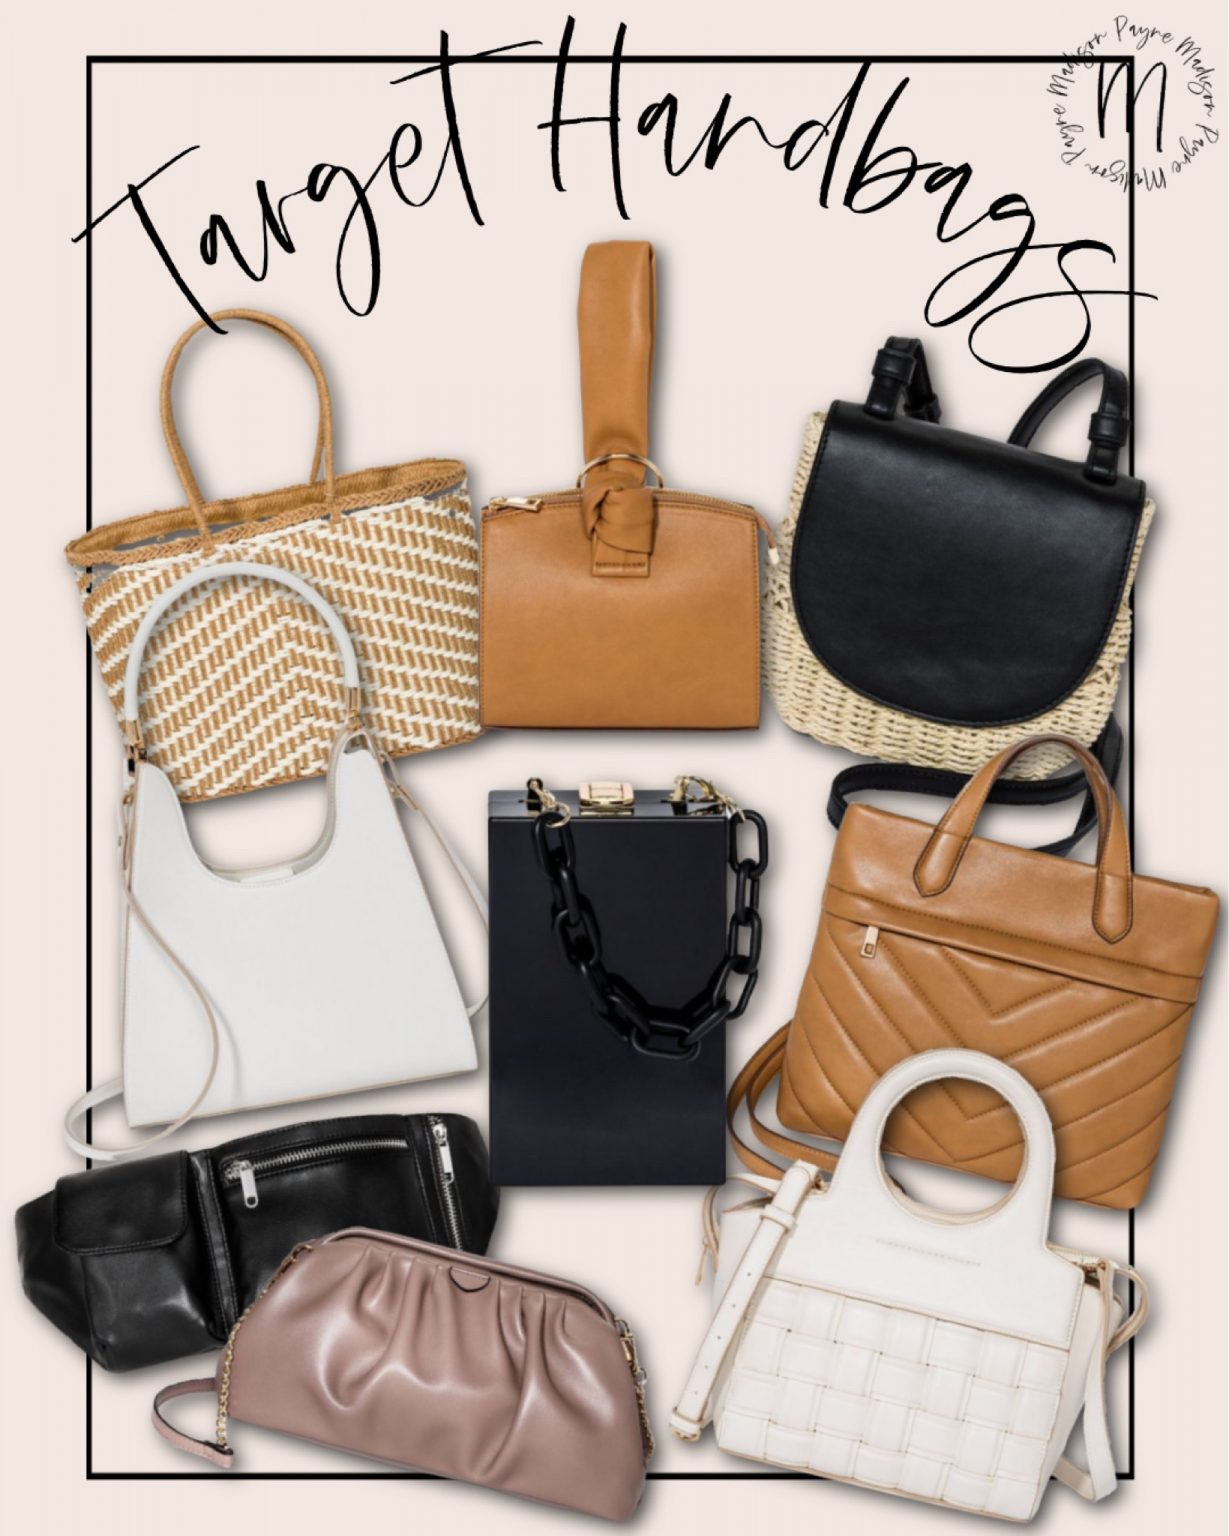 TARGET HANDBAGS FOR SPRING/SUMMER THAT YOU WILL LOVE